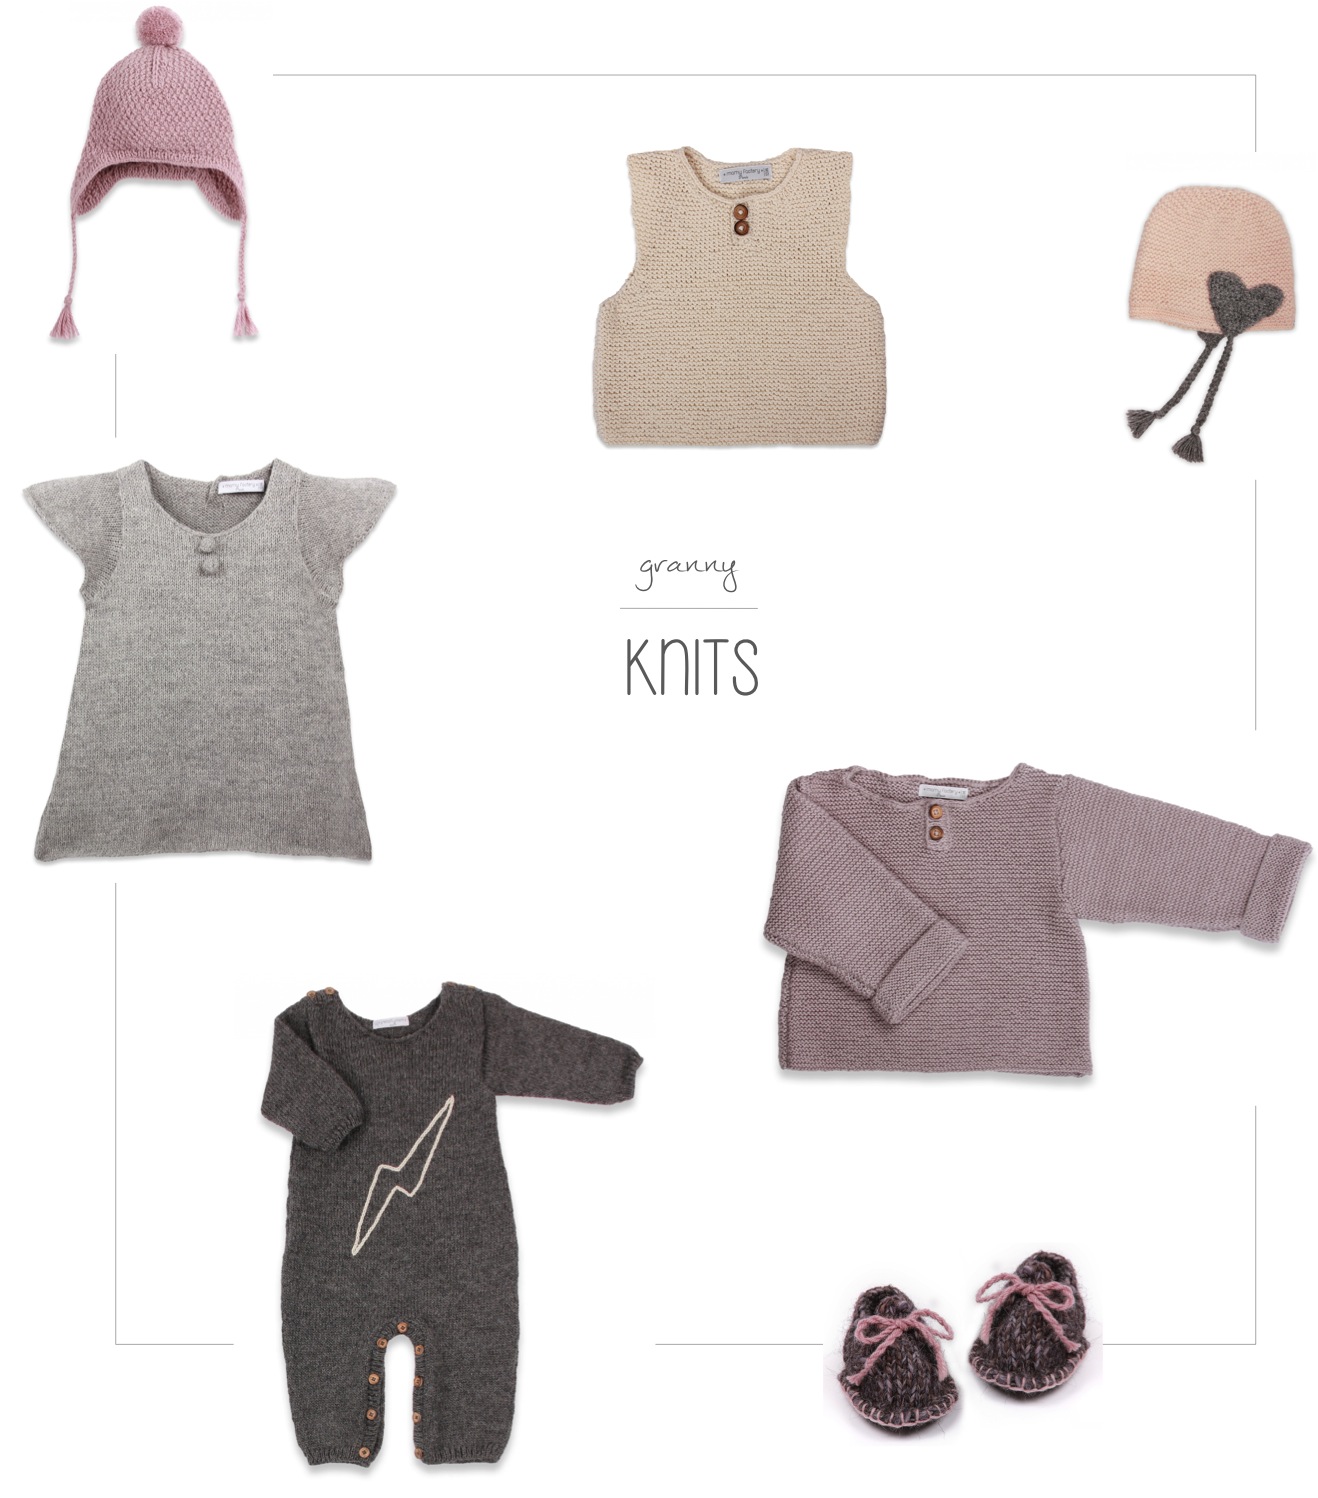 "handknitted baby and kids clothes"